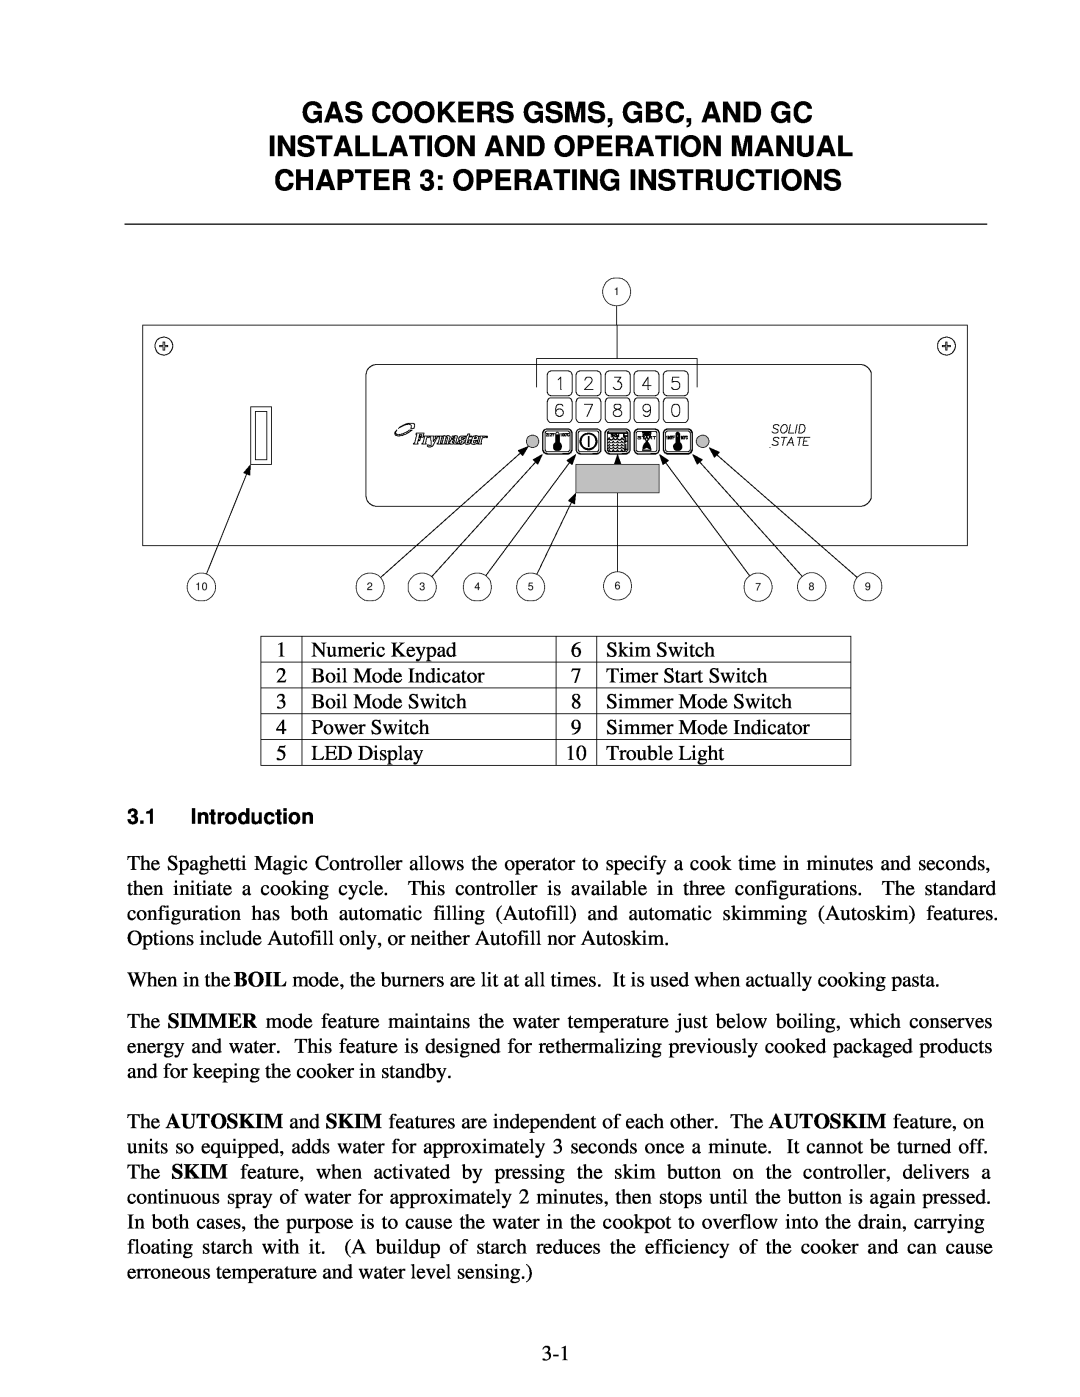 Frymaster GC, GSMS, GBC operation manual Operating Instructions, 3.1Introduction, Gas Cookers Gsms, Gbc, And Gc 